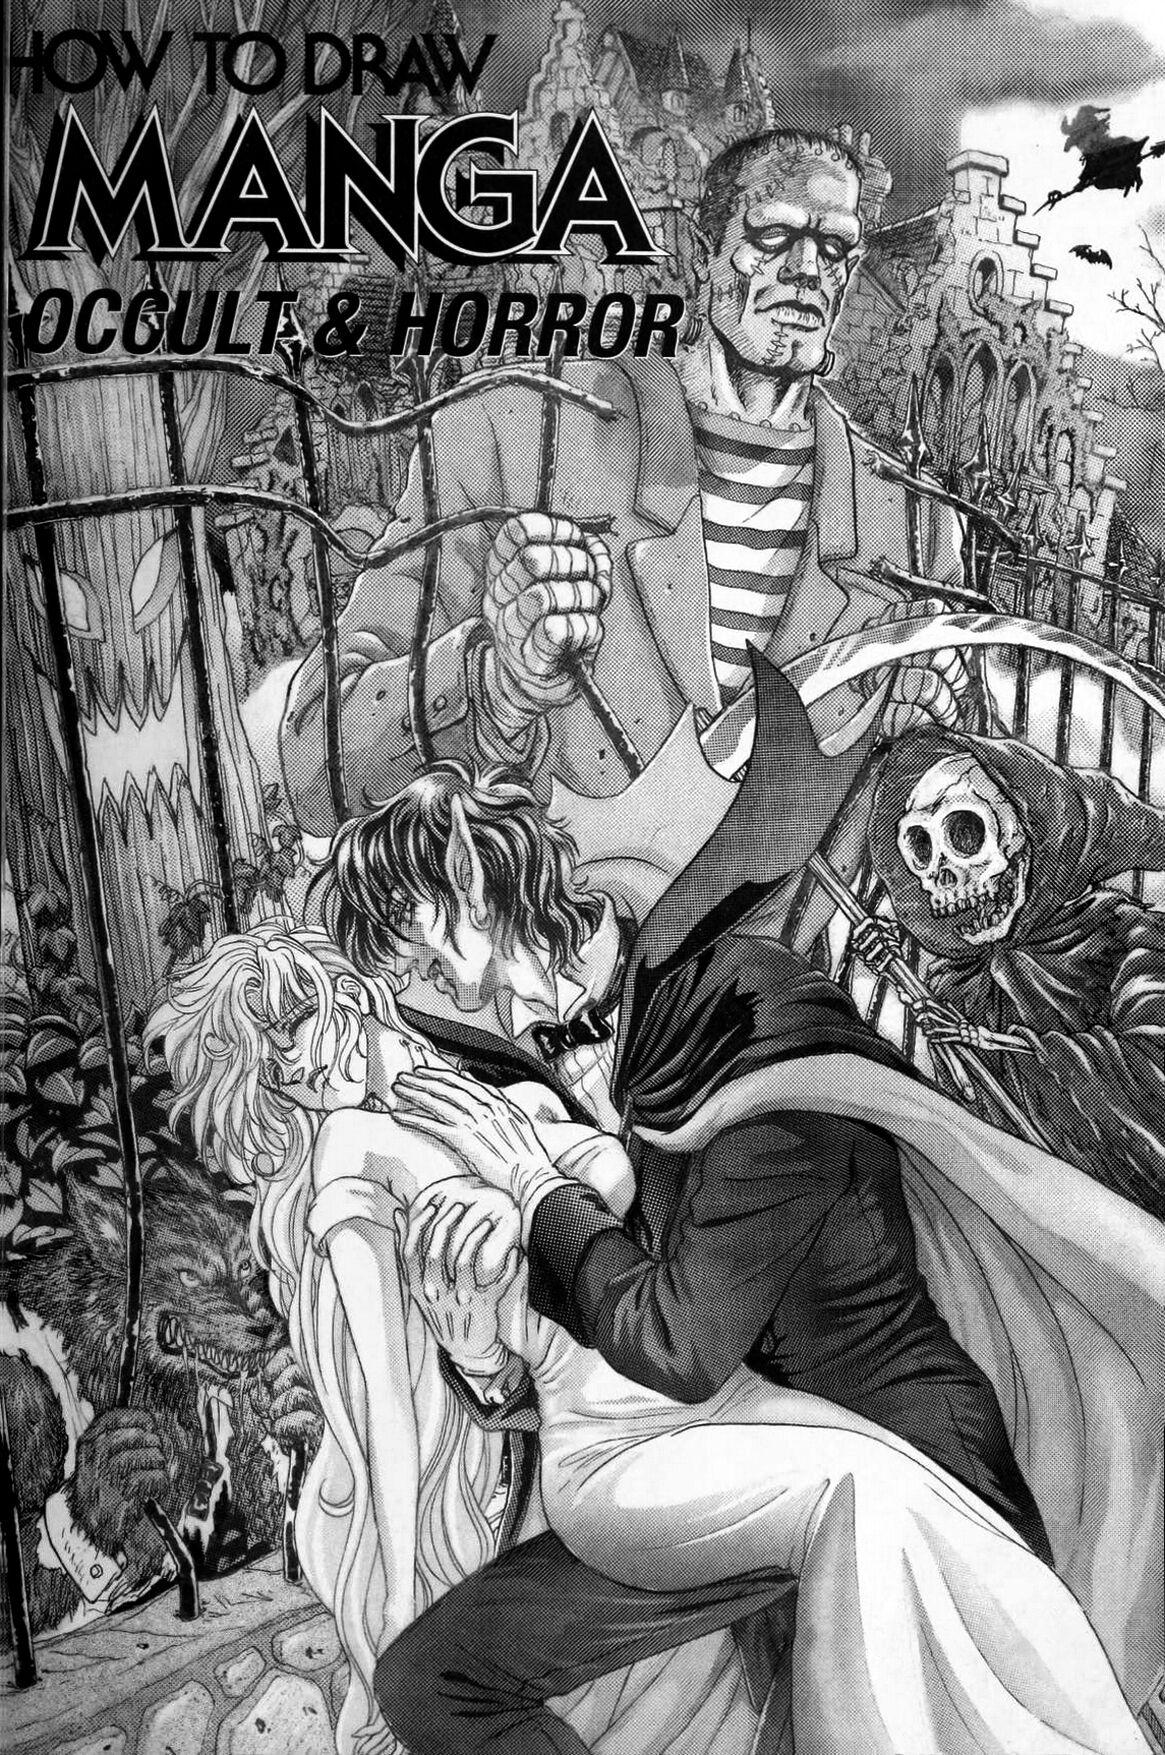 Strapon How to Draw Manga Vol. 24, Occult & Horror by Hikaru Hayashi Made - Page 5